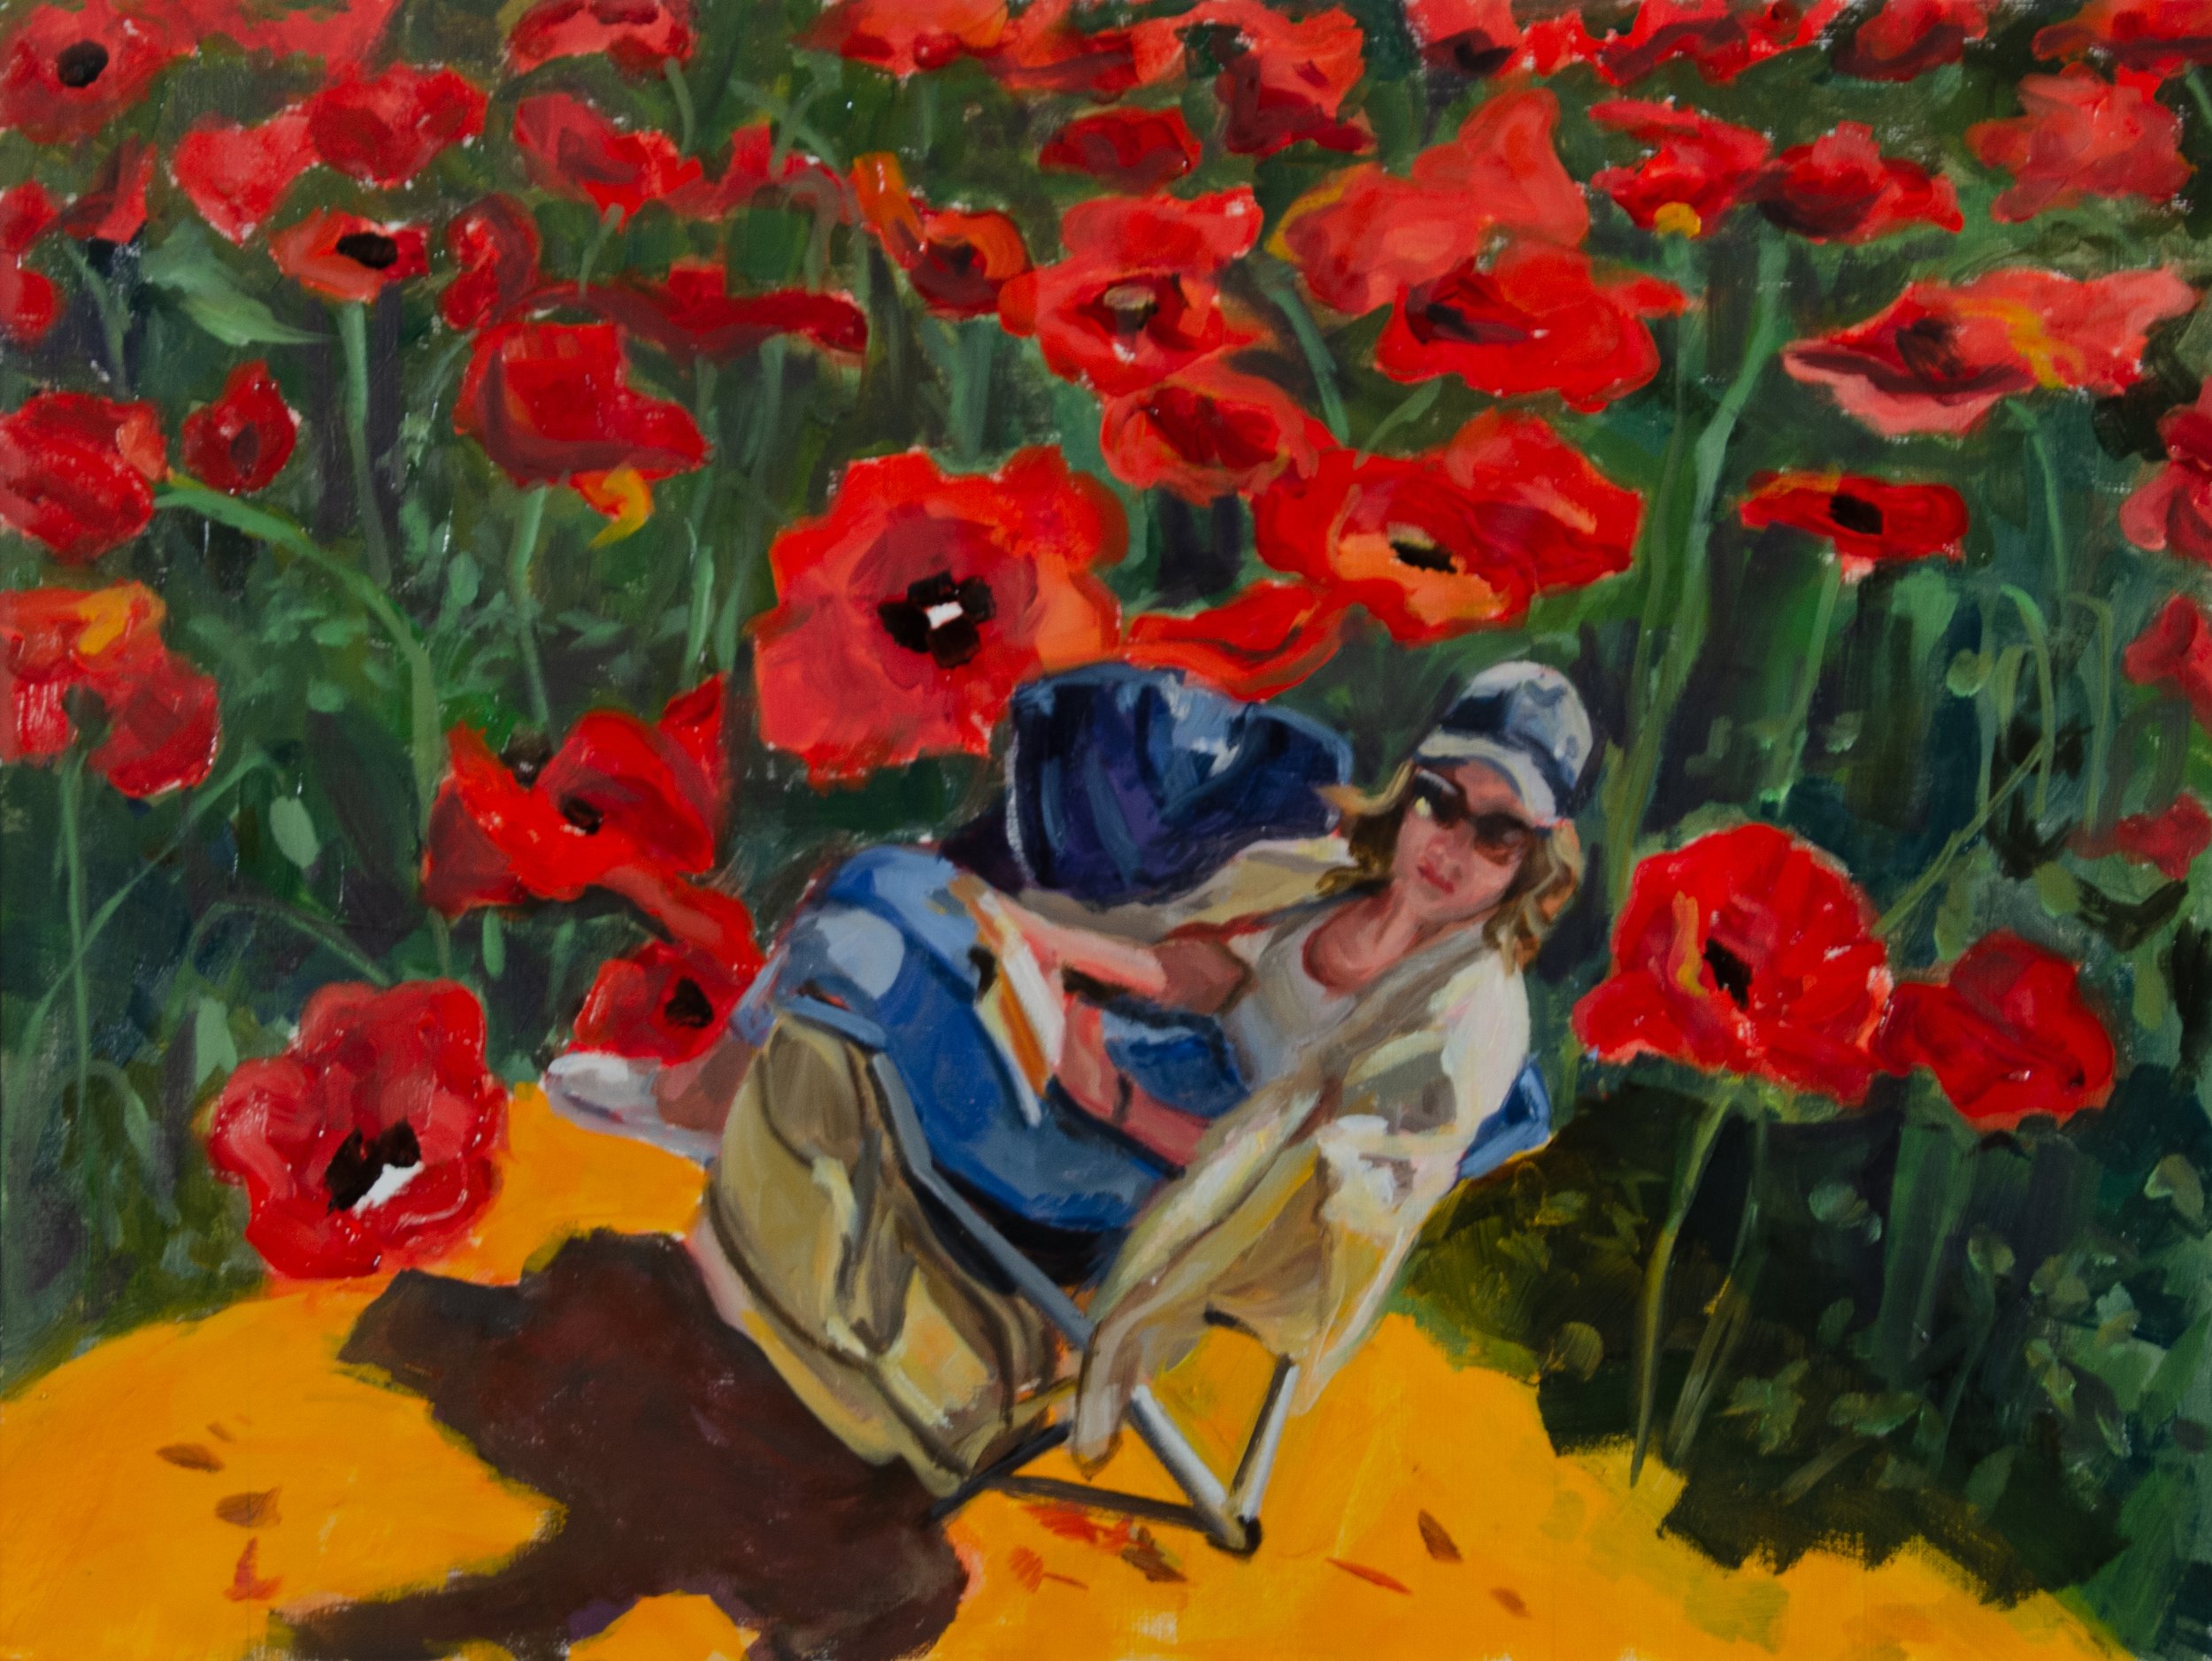 In The Poppies